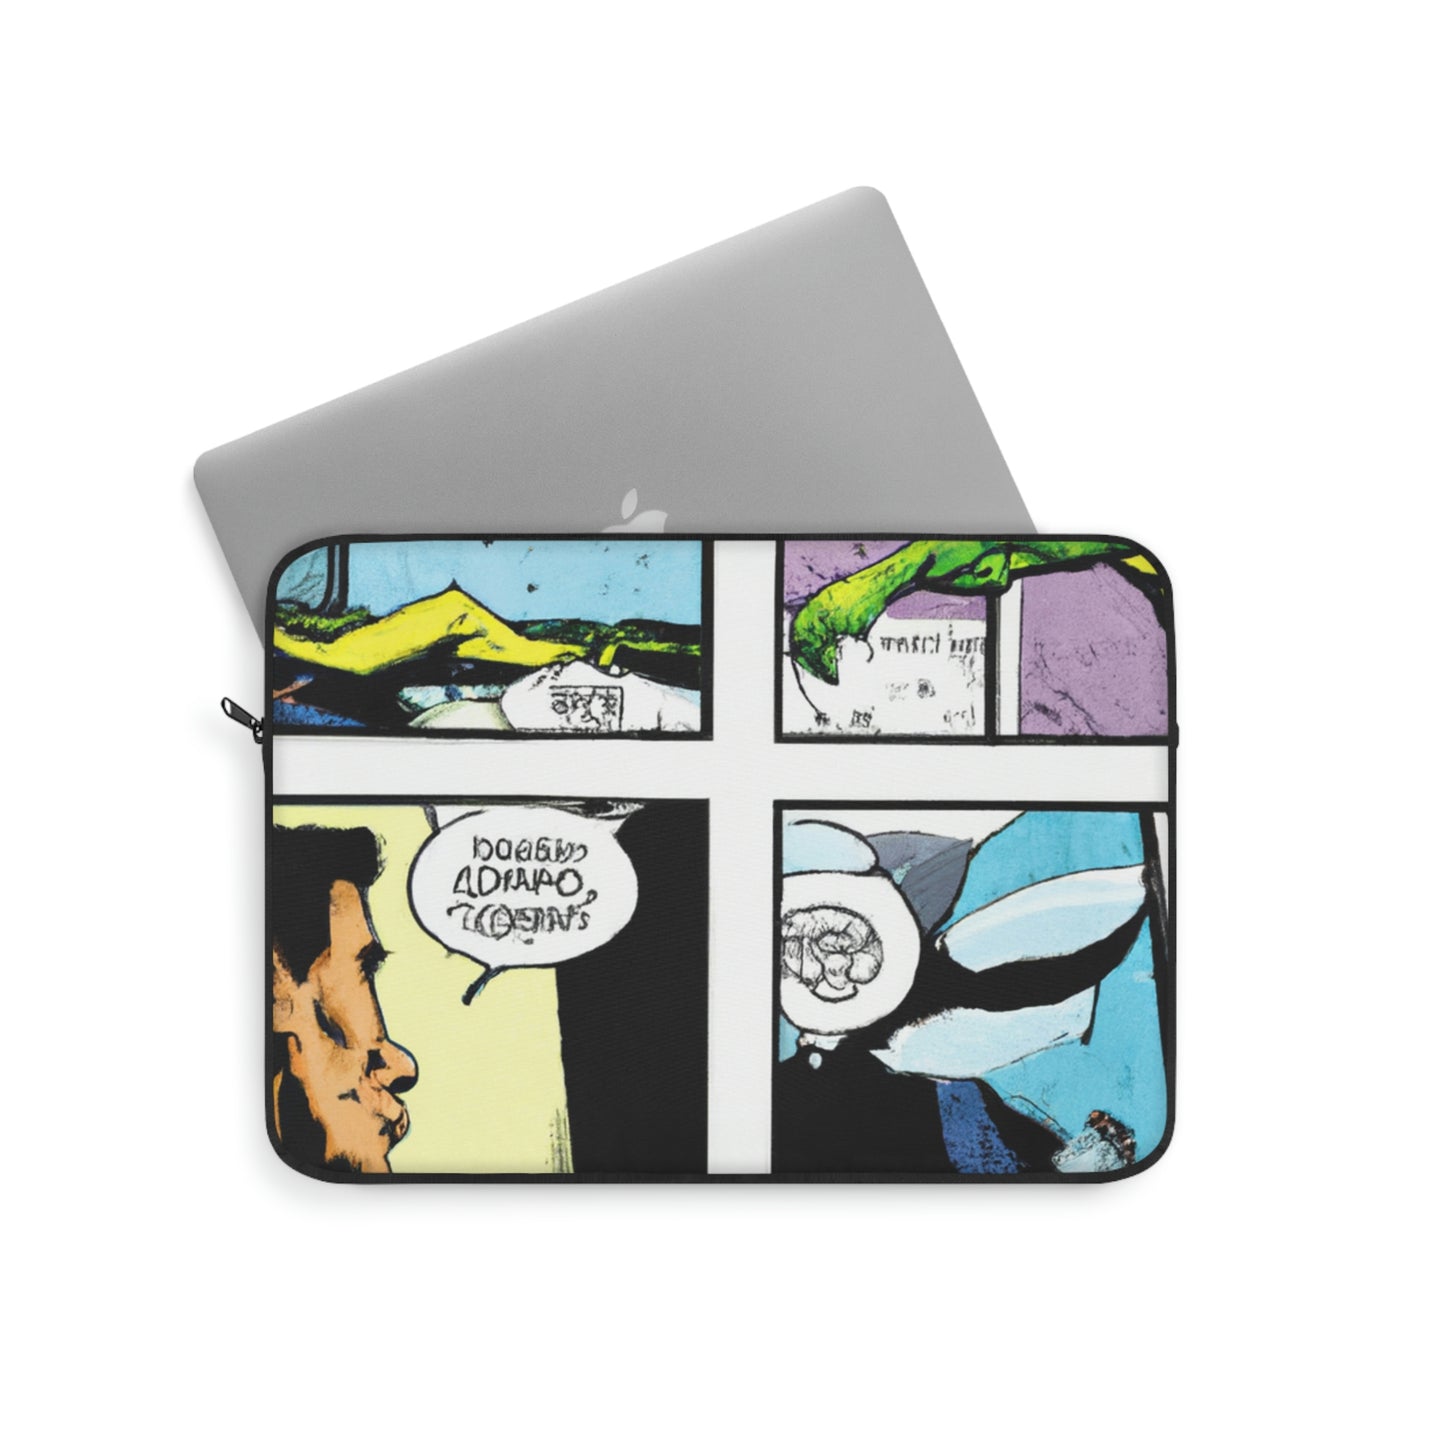 Chuck the Colossal Caveman - Comic Book Collector Laptop Computer Sleeve Storage Case Bag